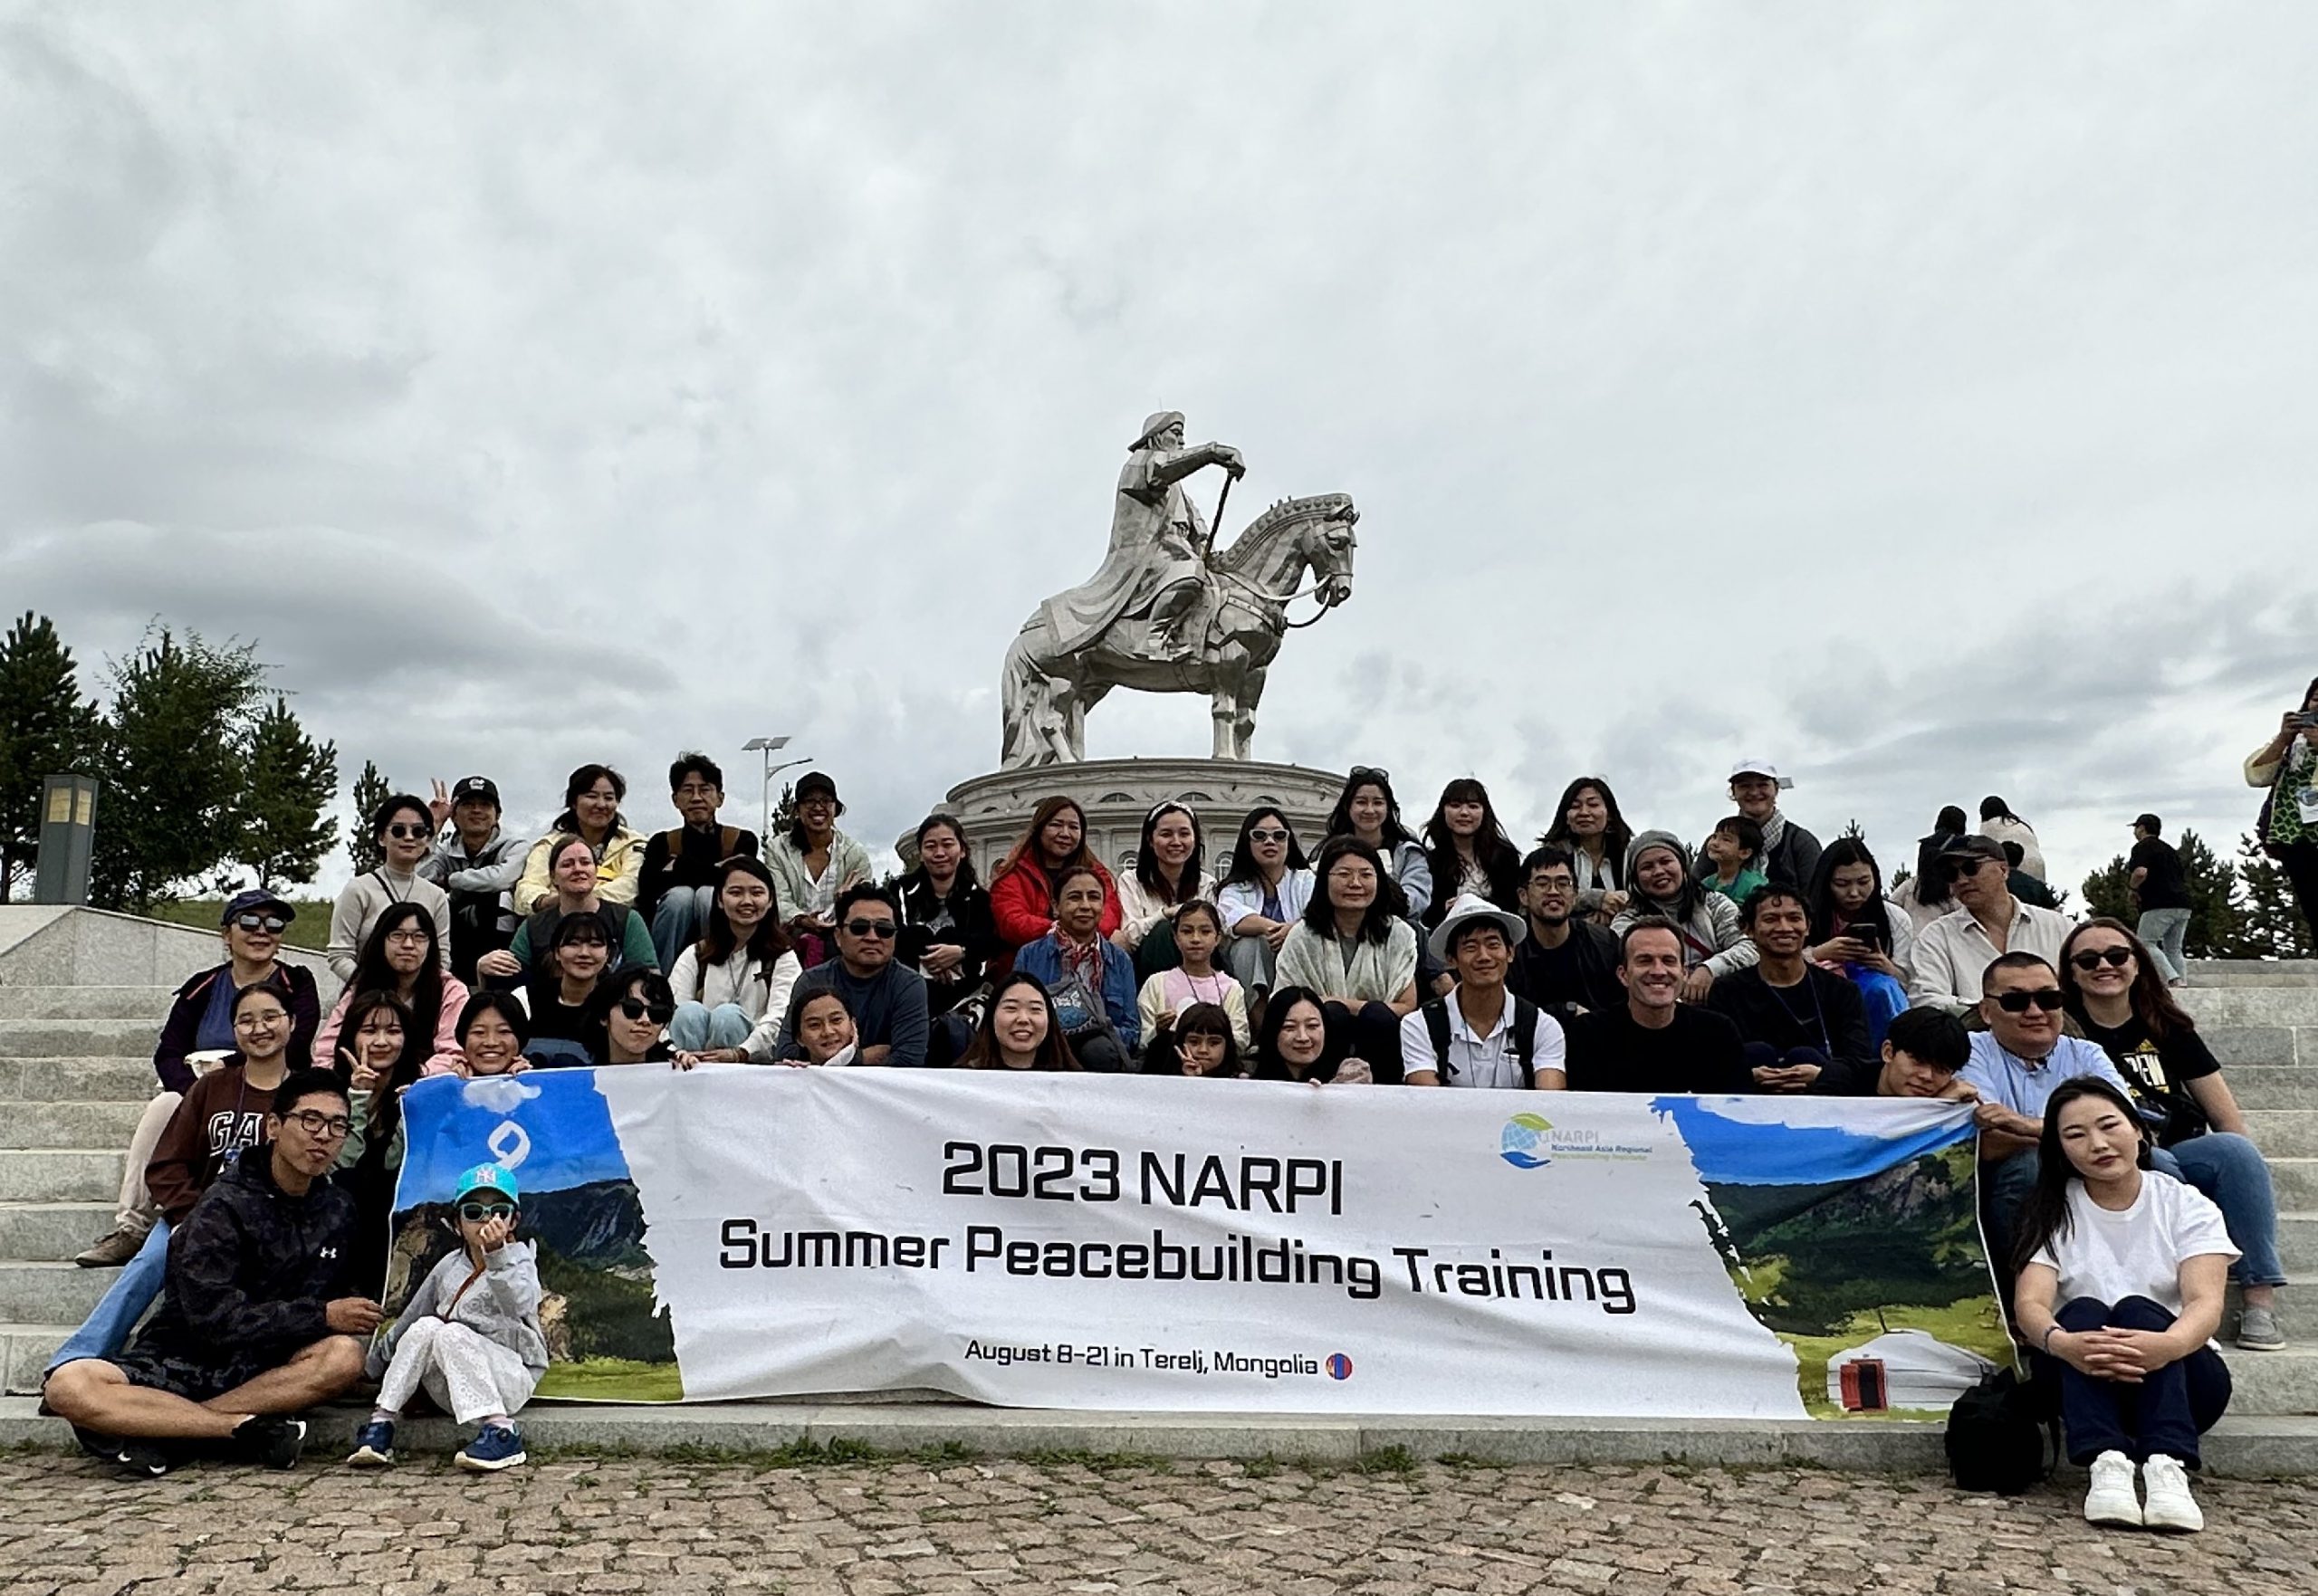 NARPI 2023 SUMMER PEACEBUILDING TRAINING SUCCESSFULLY HELD IN MONGOLIA